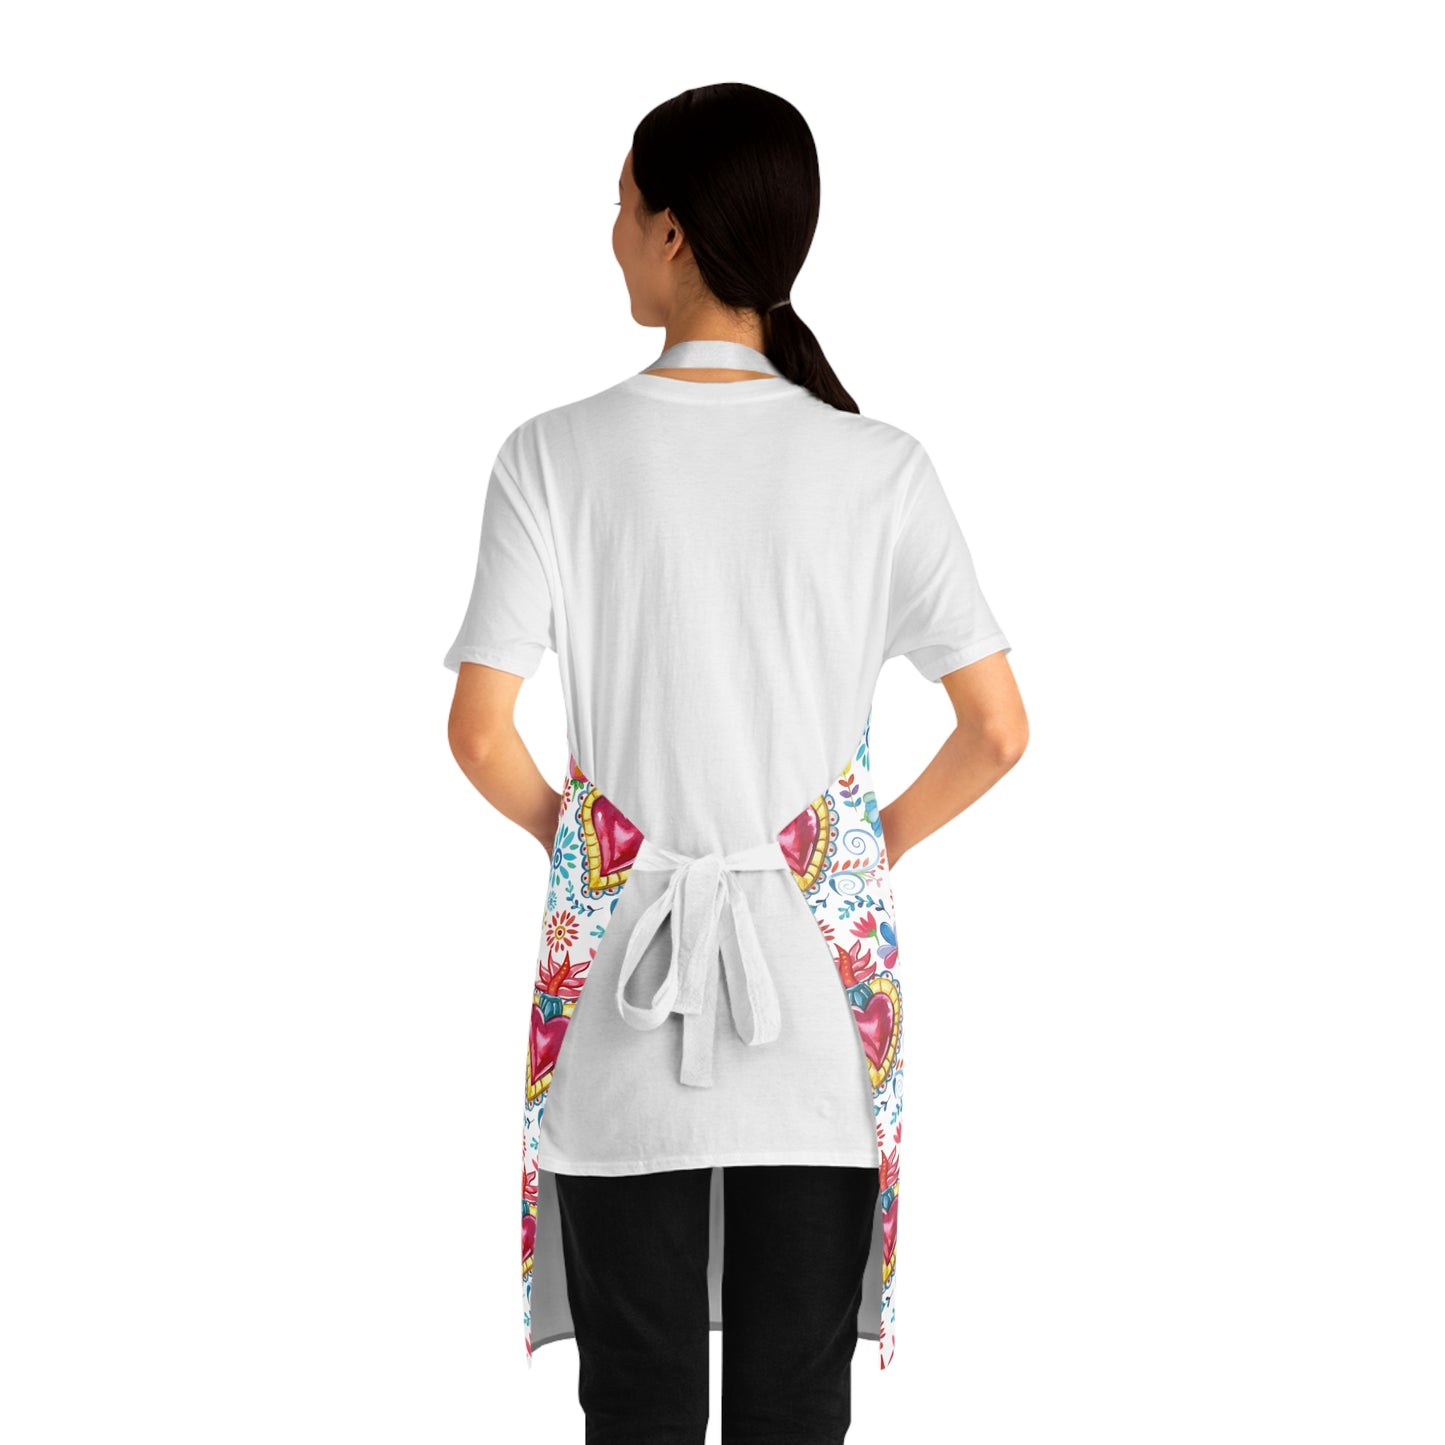 Milagritos mandil for her. Sacred hearts Apron. Mexican gift ideas for Mexican mom, Mexican wife or comadre.